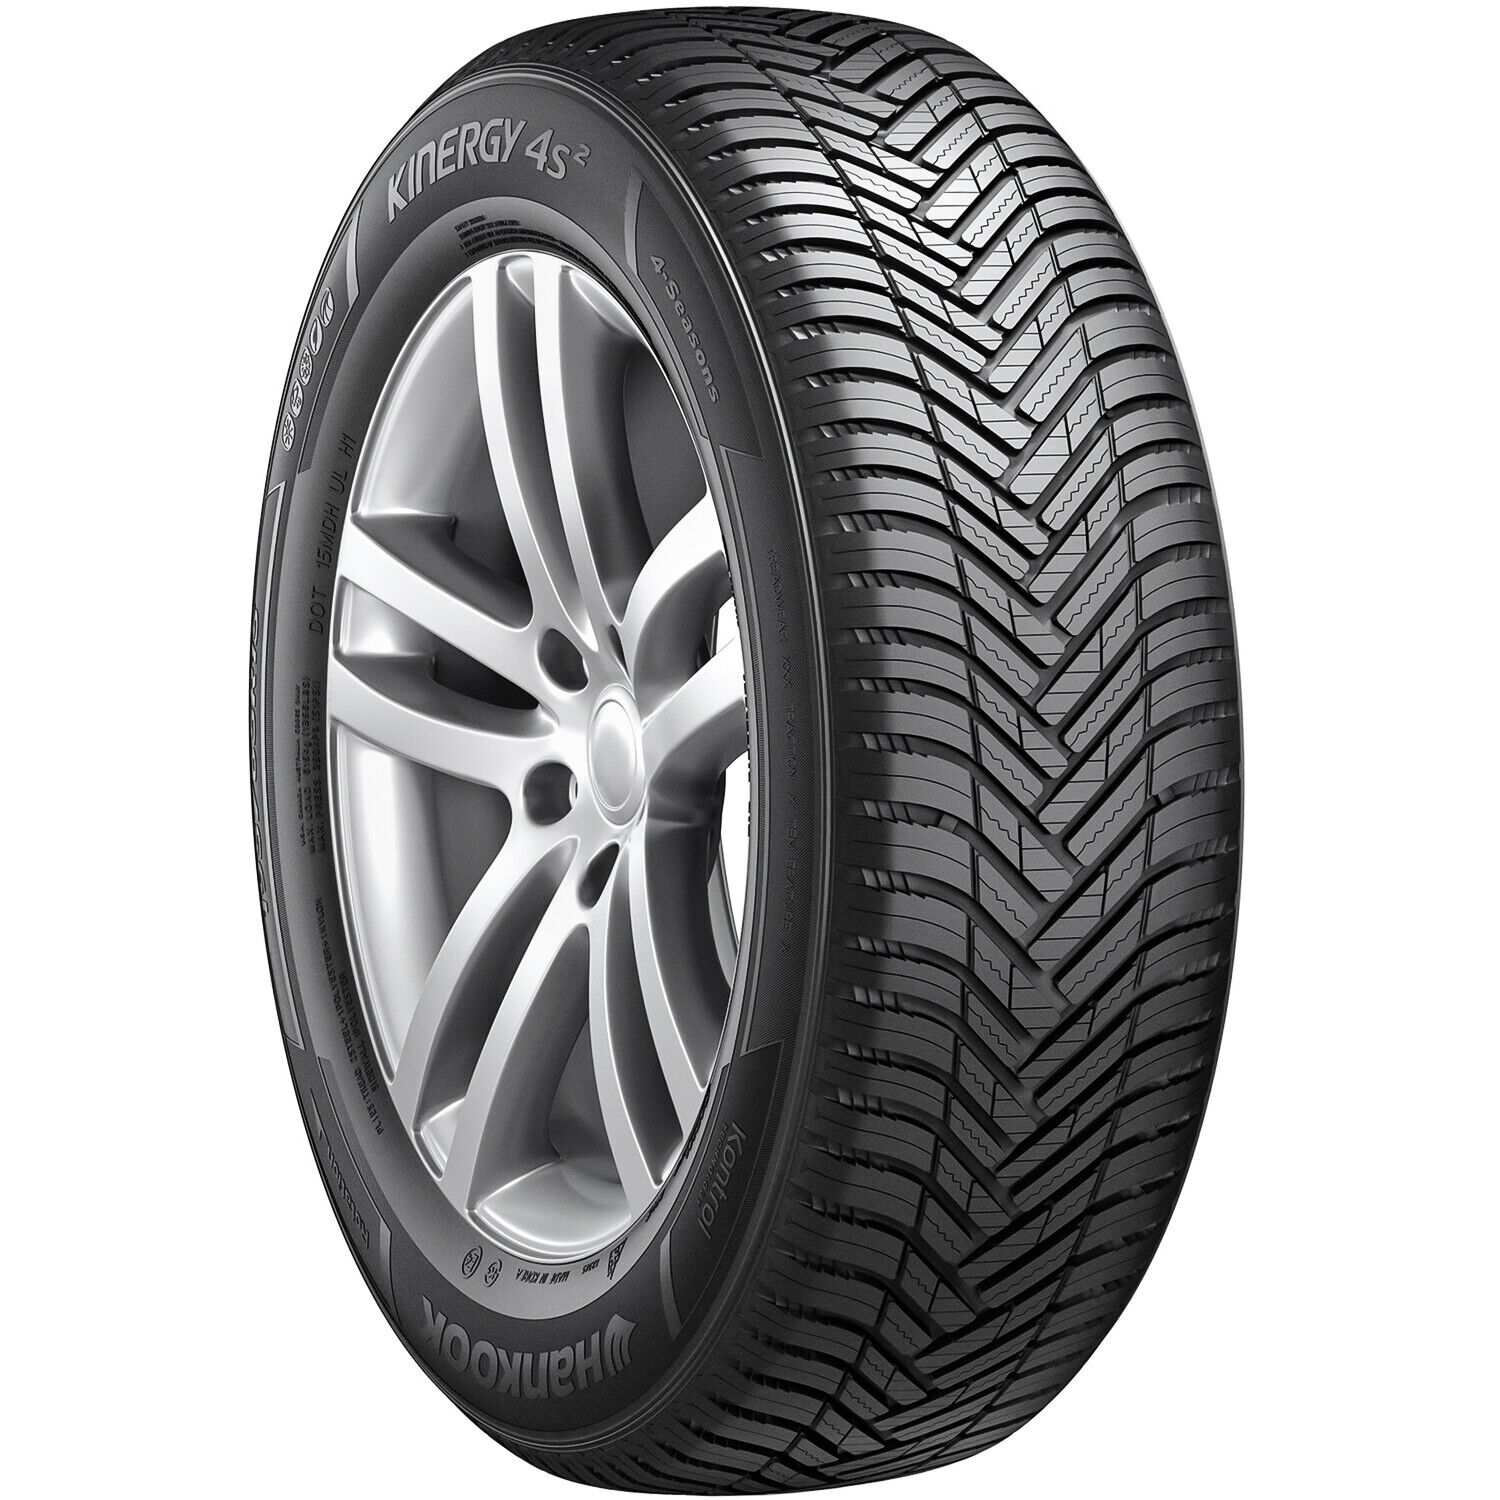 2 Tires Hankook Kinergy 4S2 205/55R16 91V All Weather